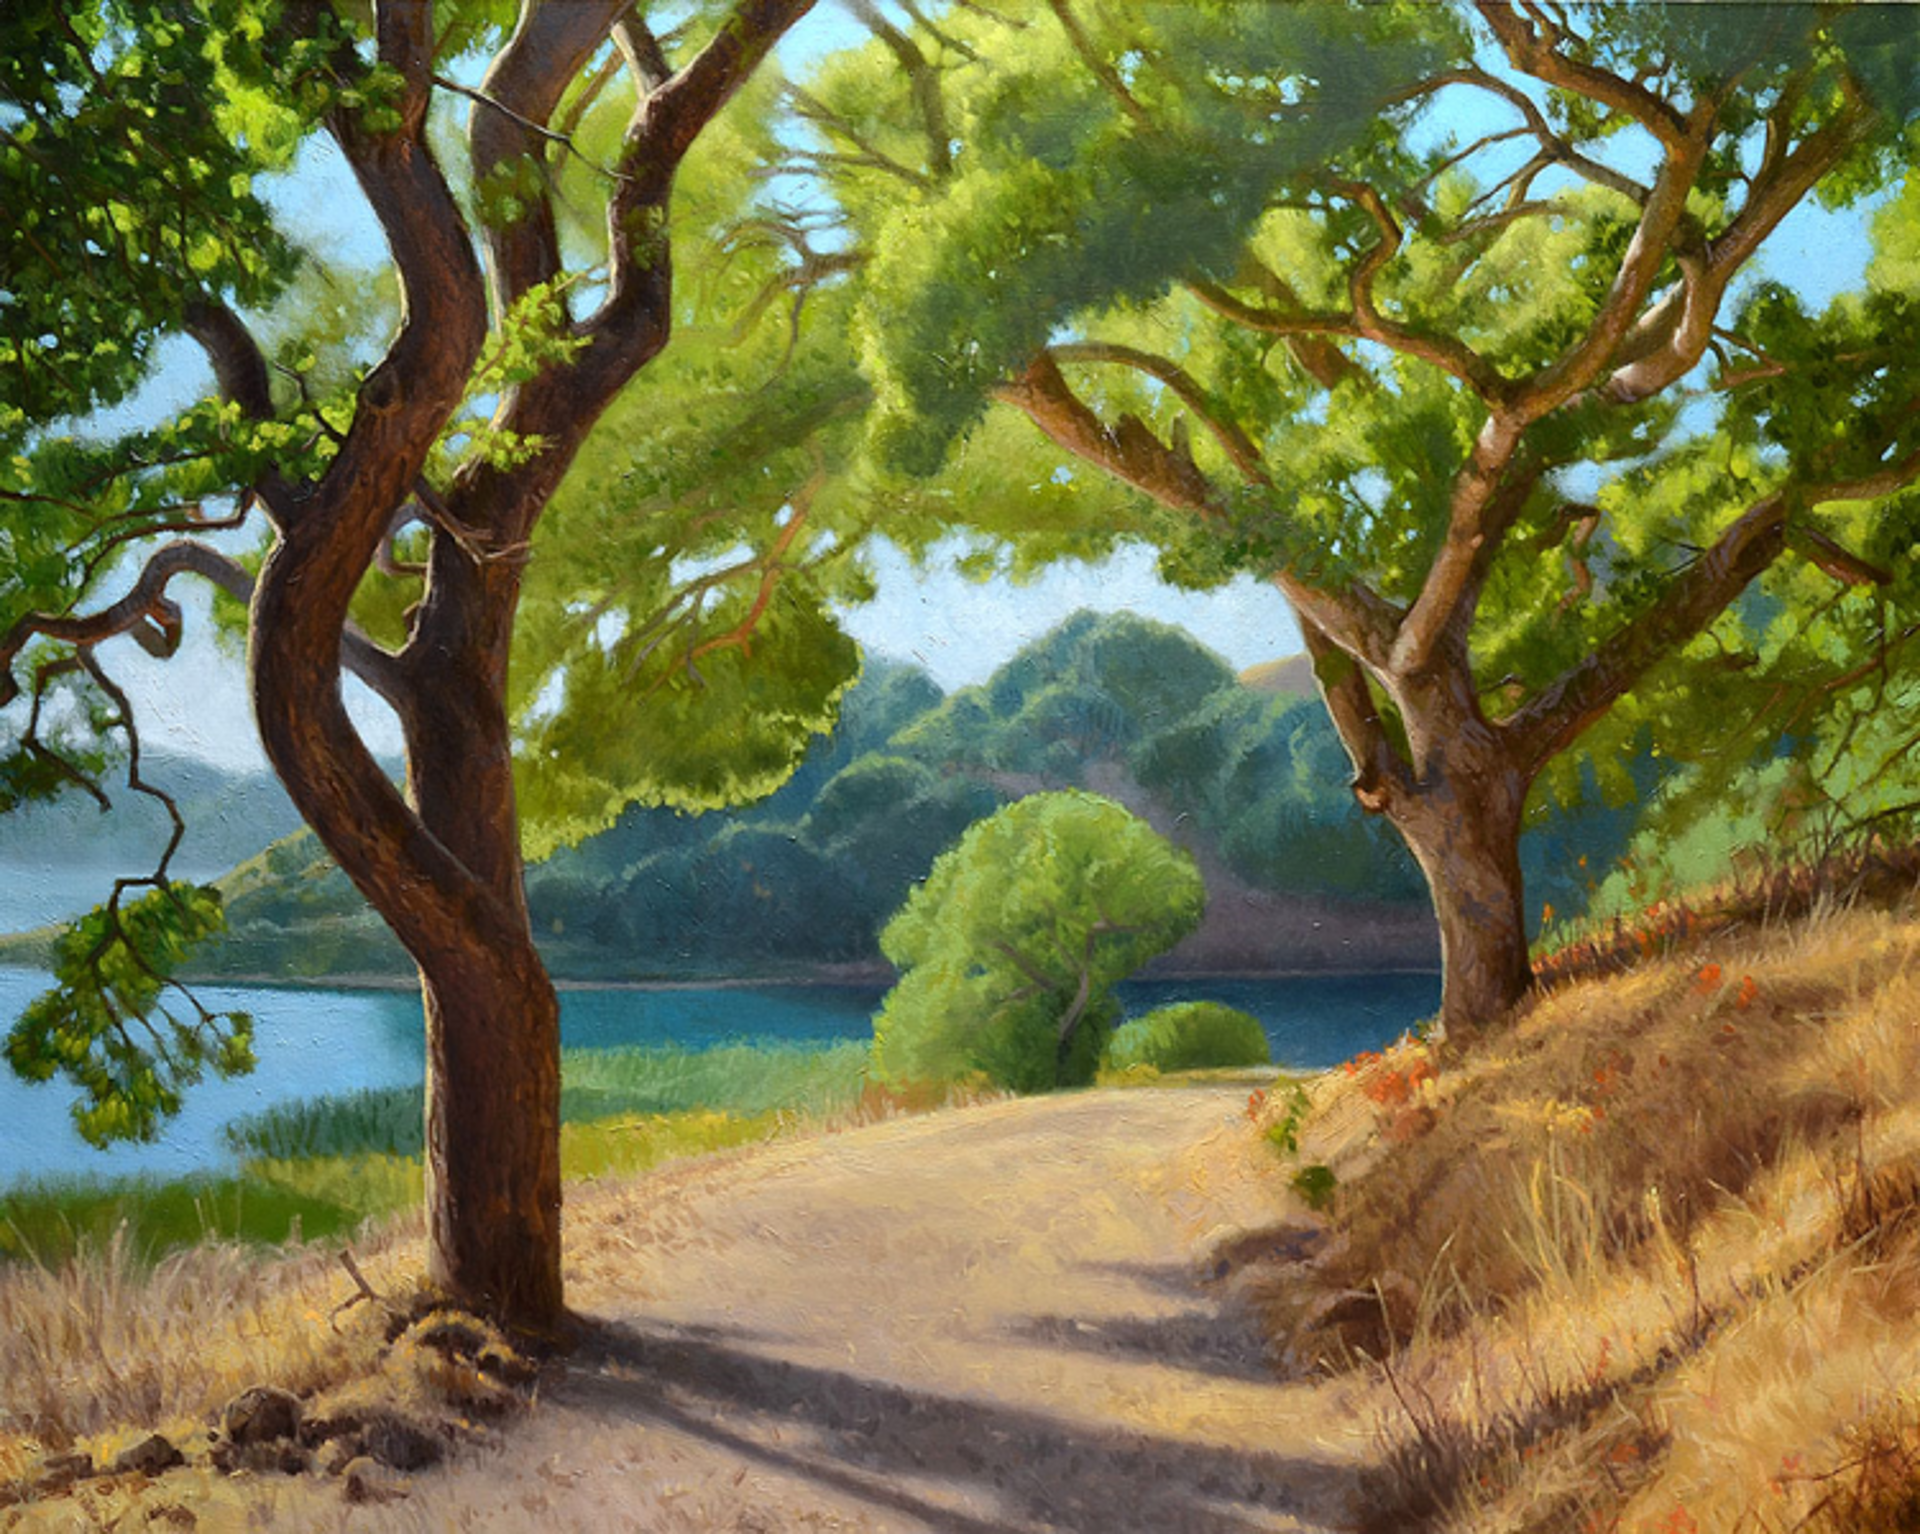 Oak Trees and Afternoon Light by Ocean Quigley